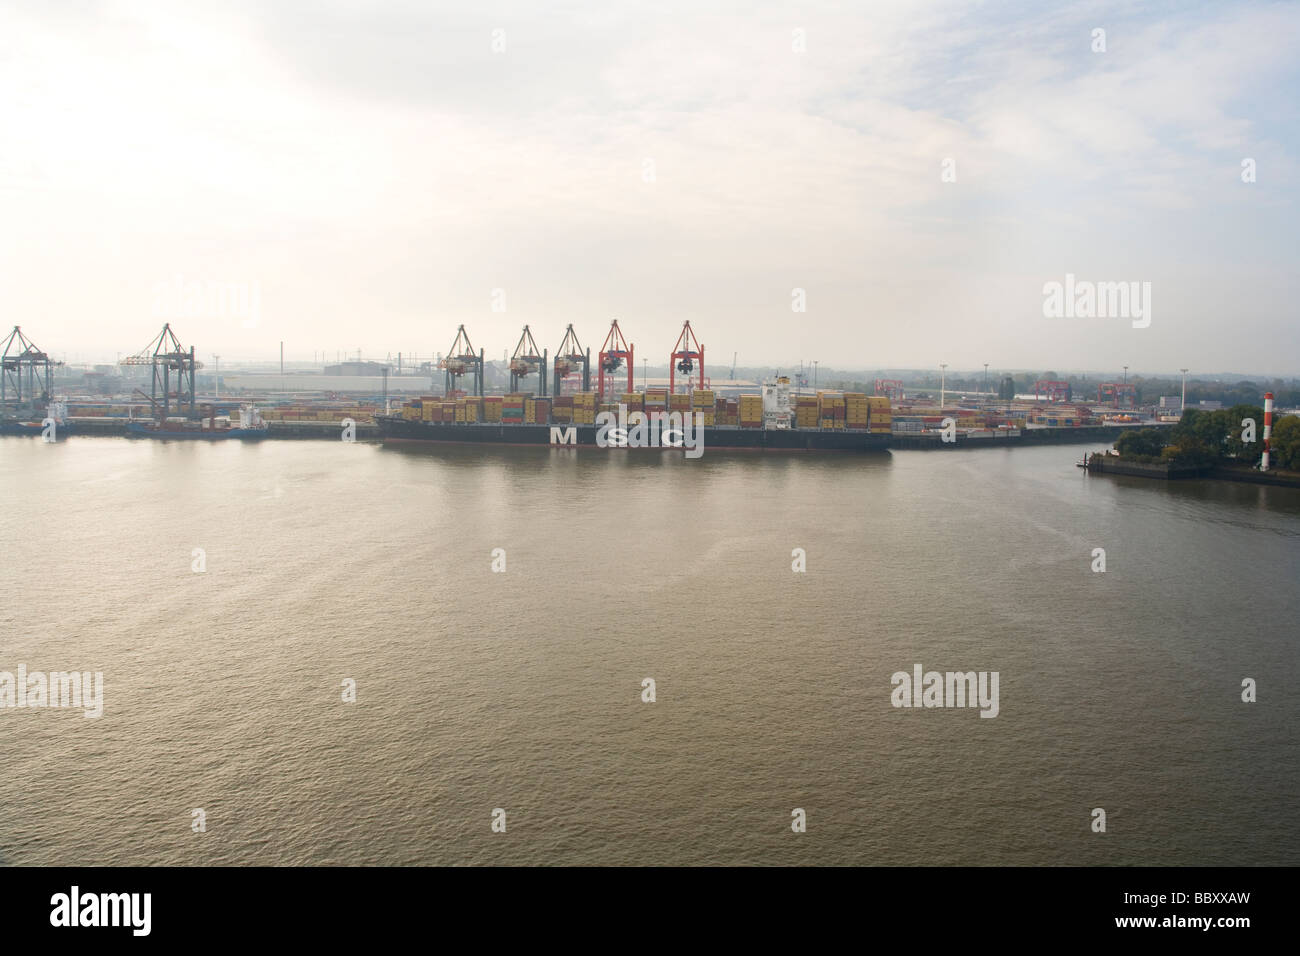 A high view of The Port of Hamburg, Germany Stock Photo